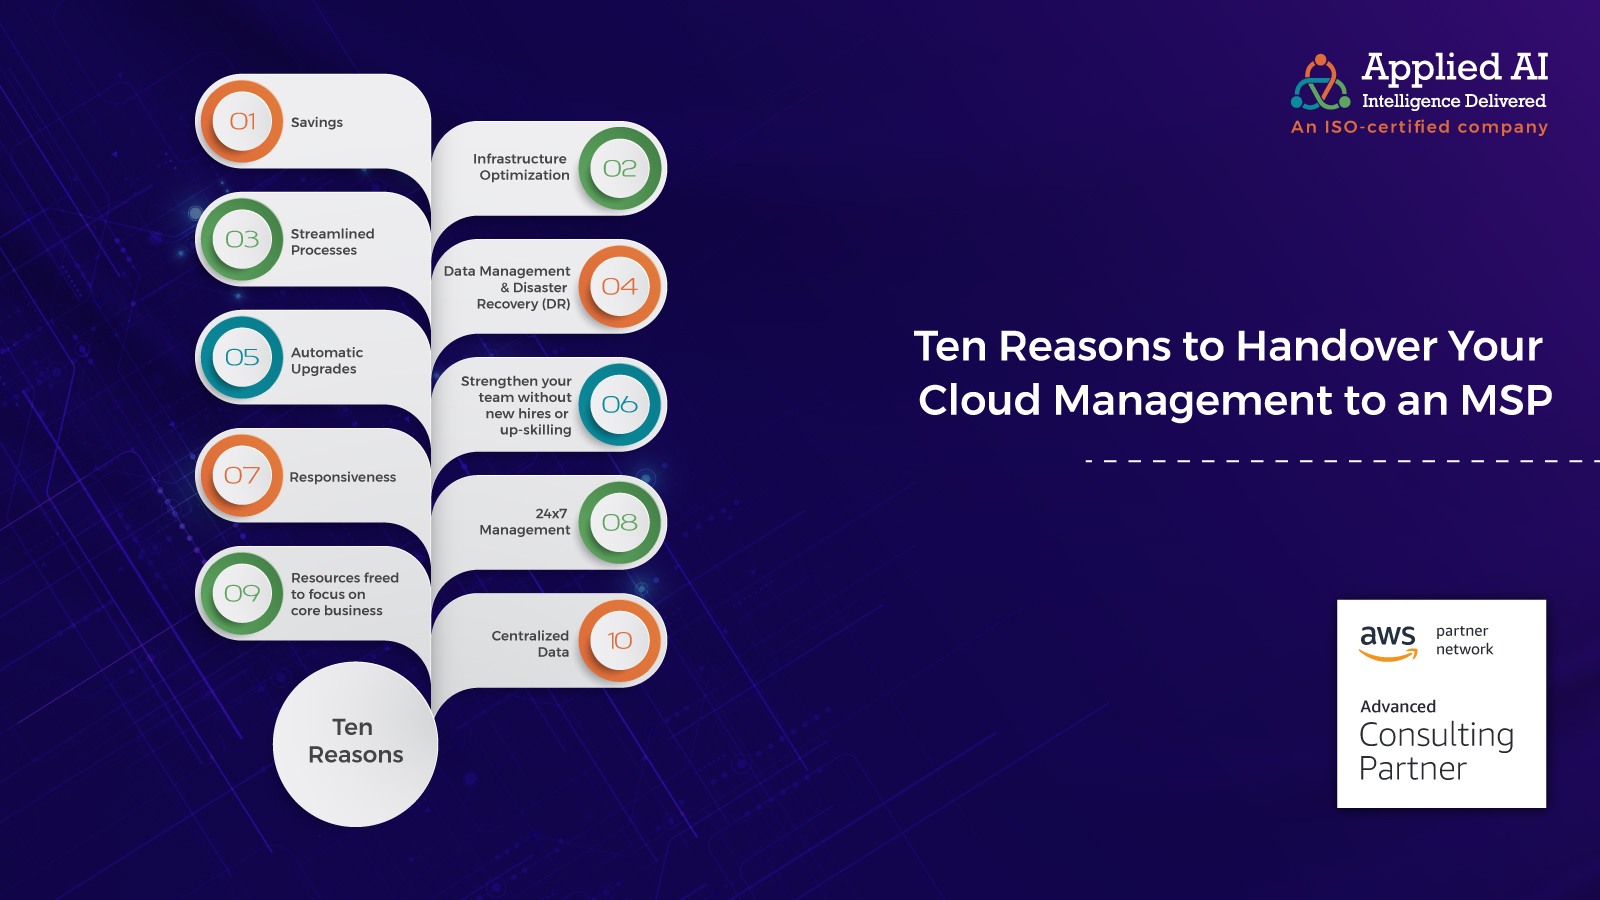 Ten reasons to handover your cloud management to an MSP